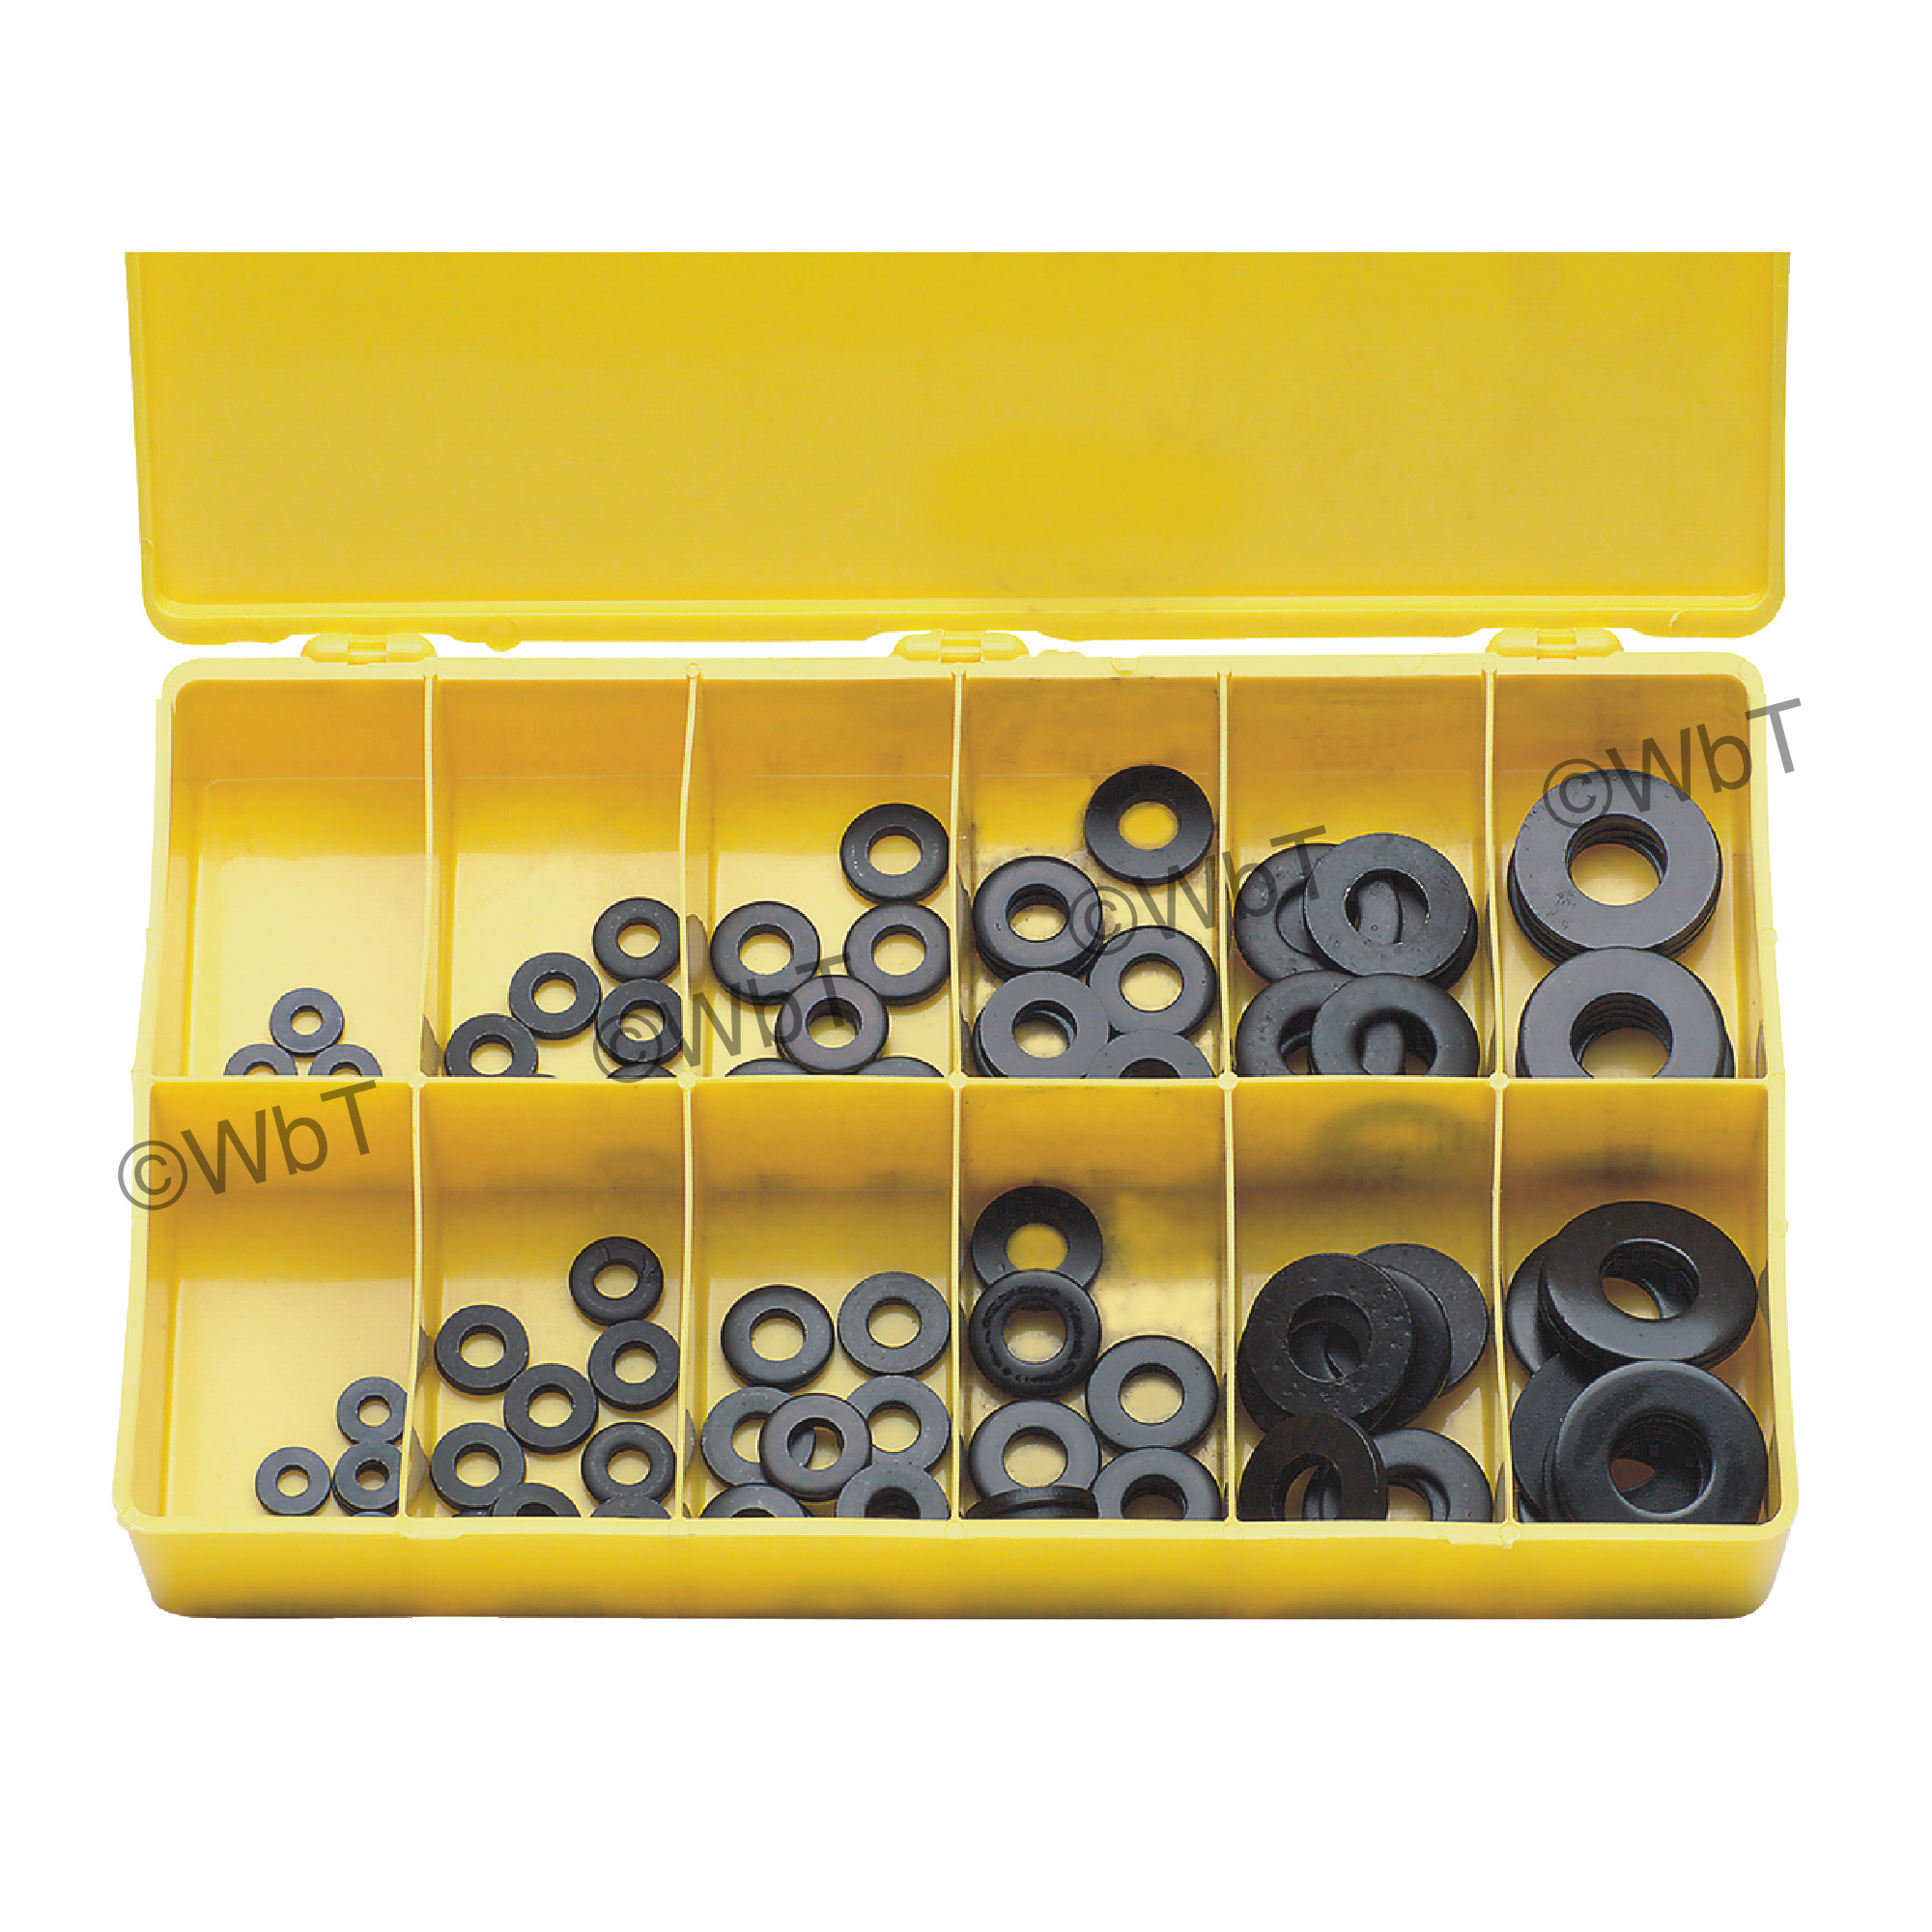 120 Metric EXTRA THICK HEAVY DUTY Flat Washer Assortment 6mm 8mm 10mm 12mm 